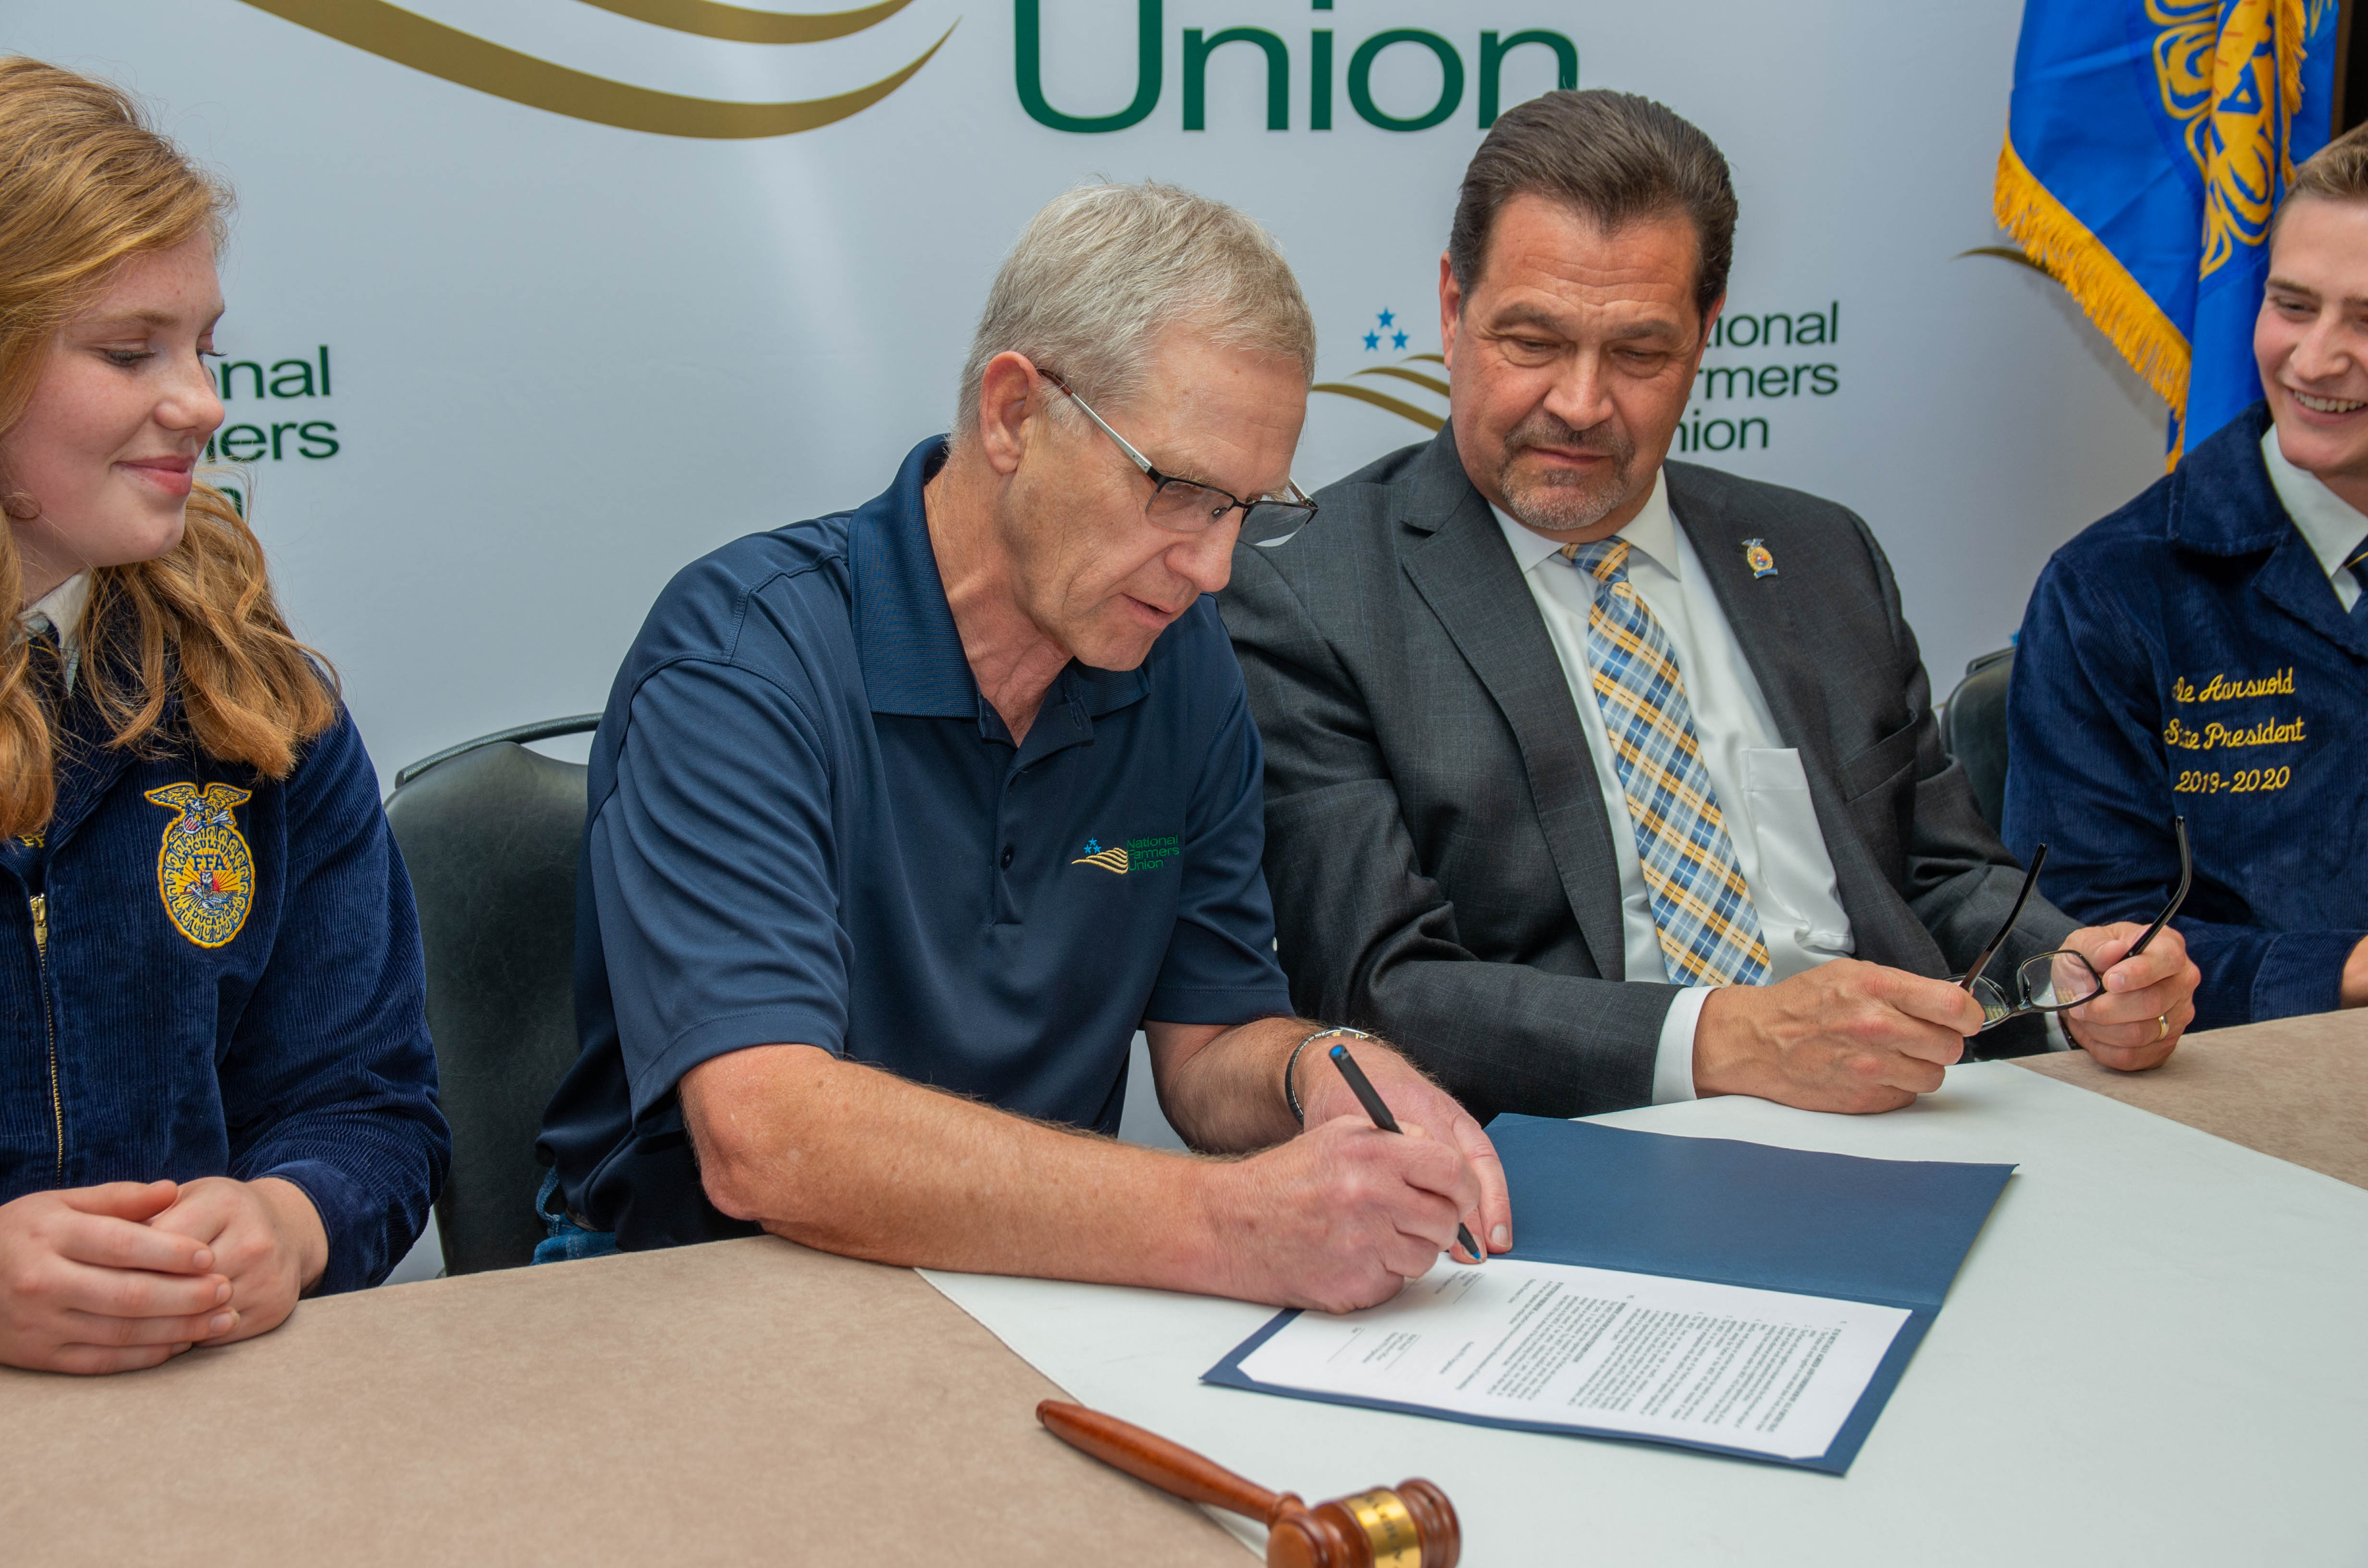 NFU, FFA Cement Partnership at MOU Signing Ceremony; Groups Work Together to Strengthen Youth Agricultural Education and Leadership